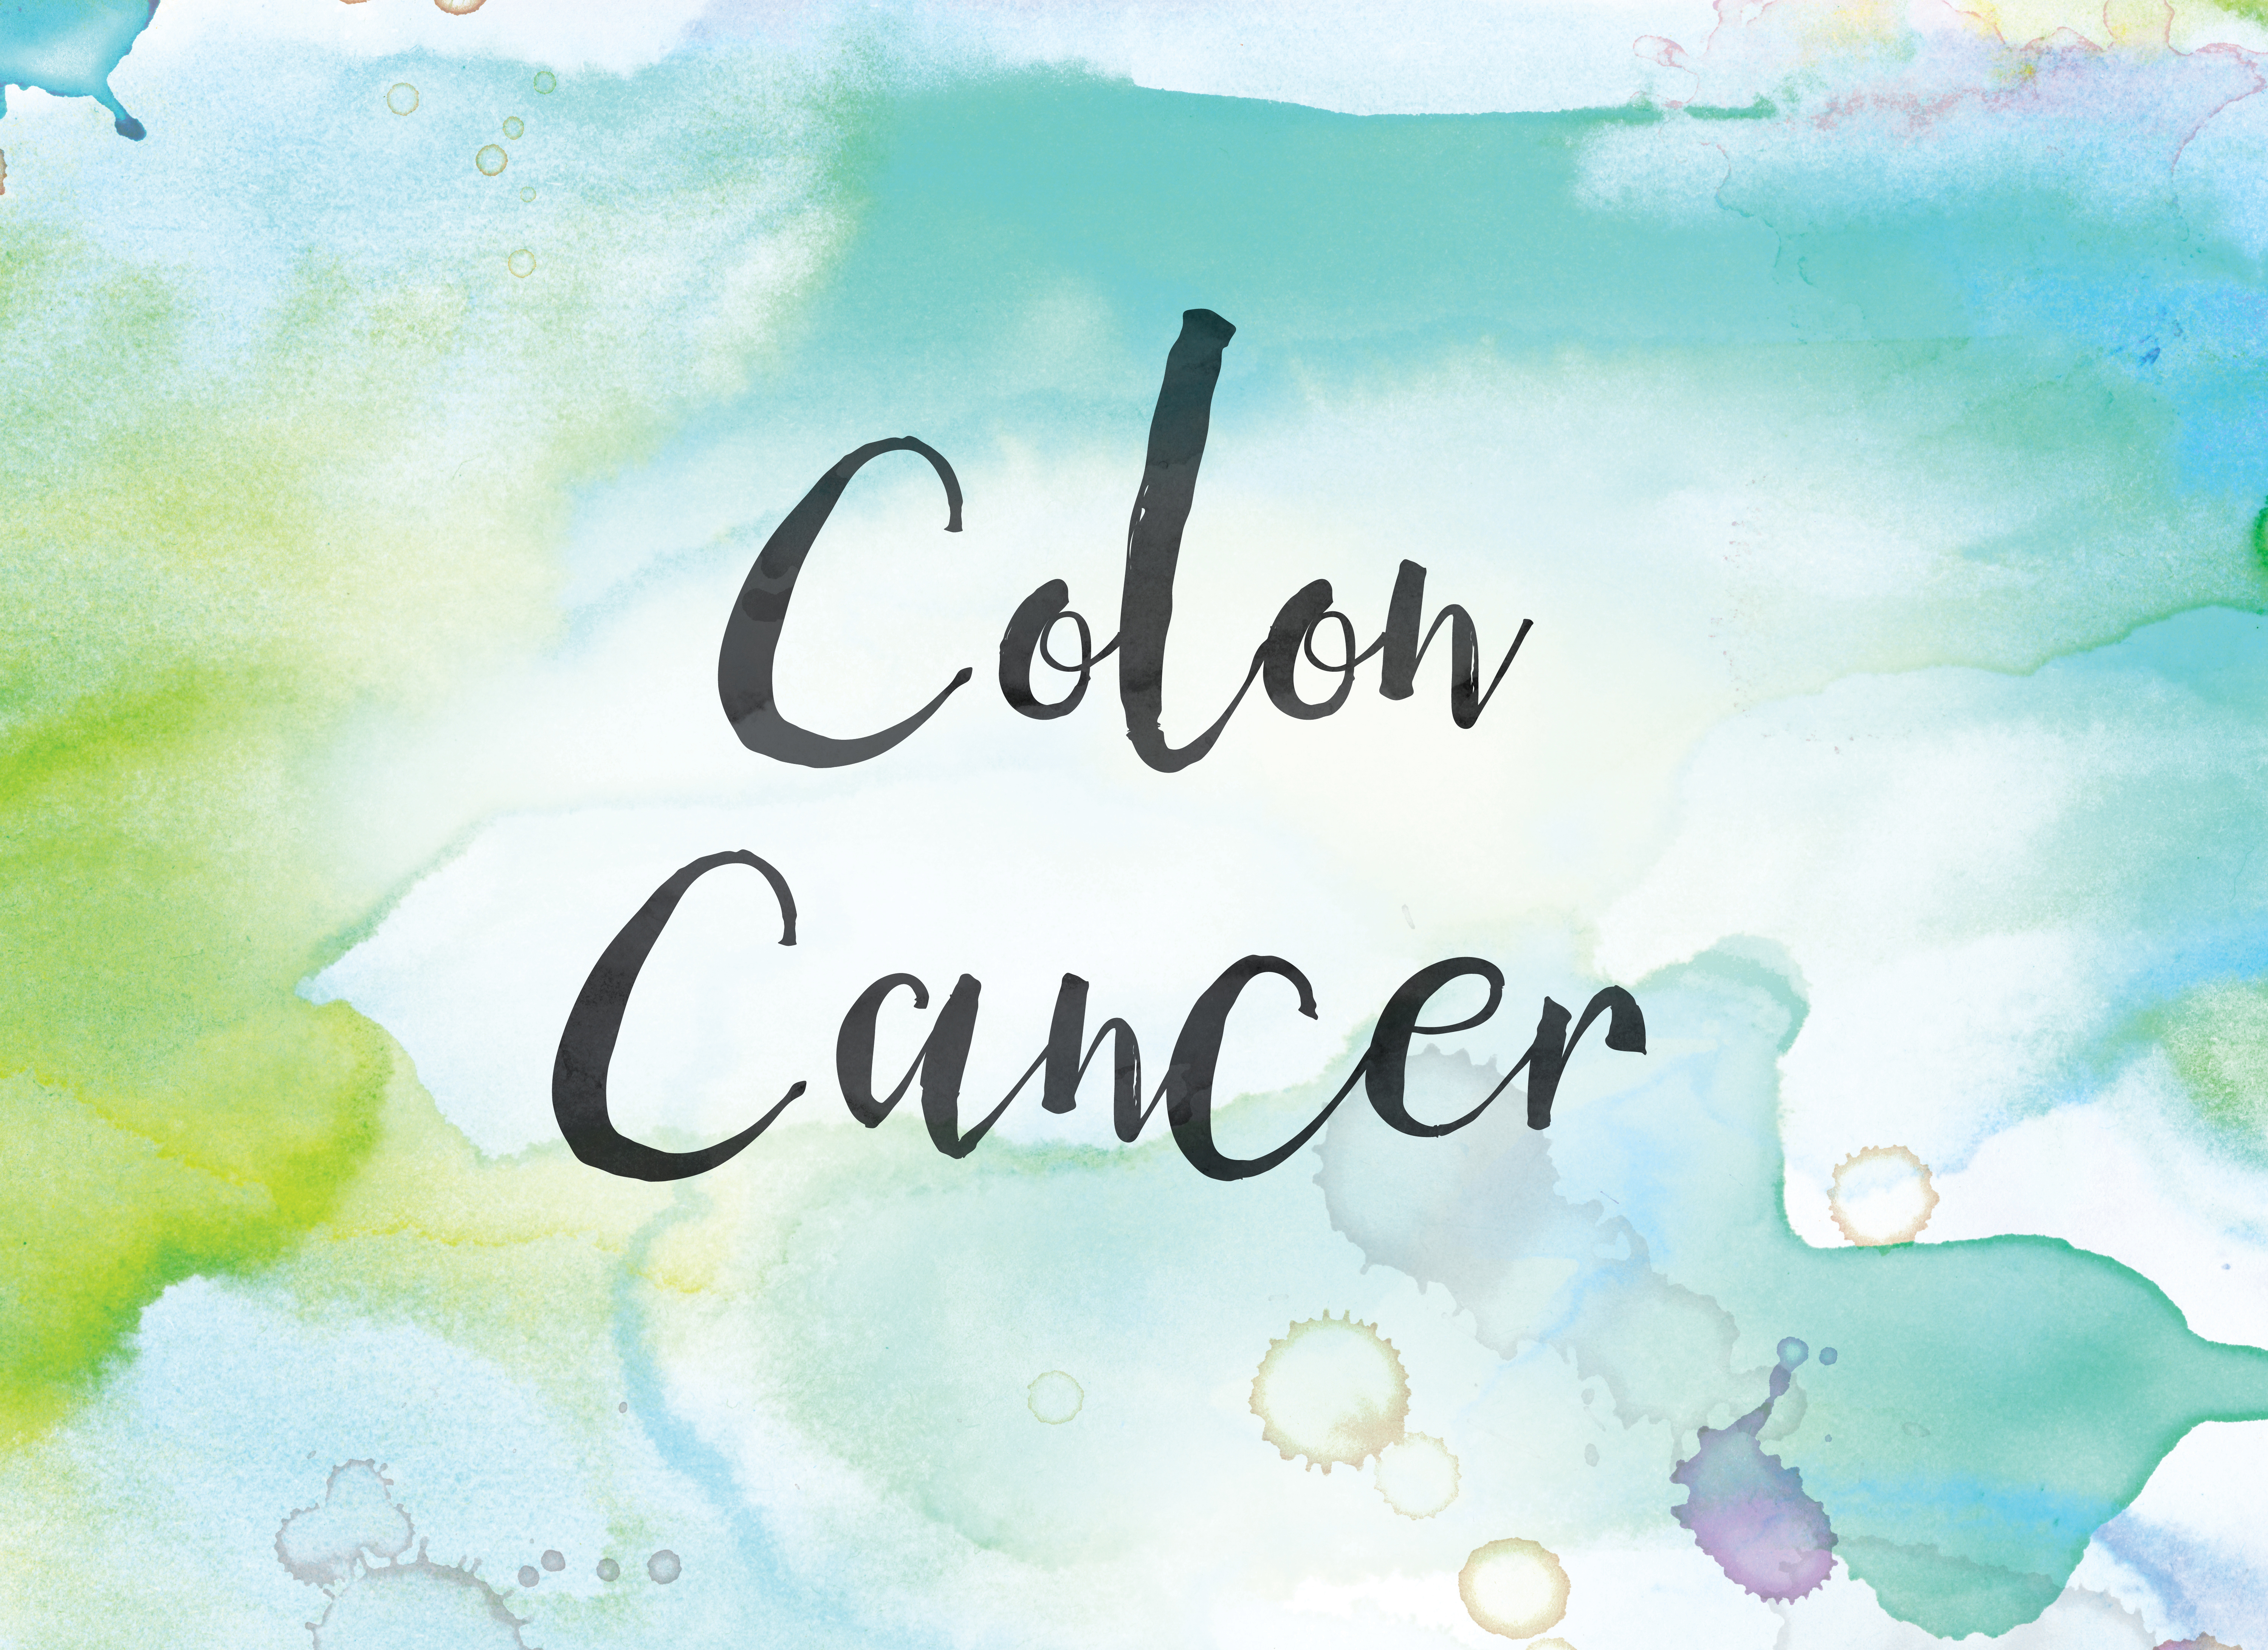 life-insurance-with-colorectal-cancer-concept